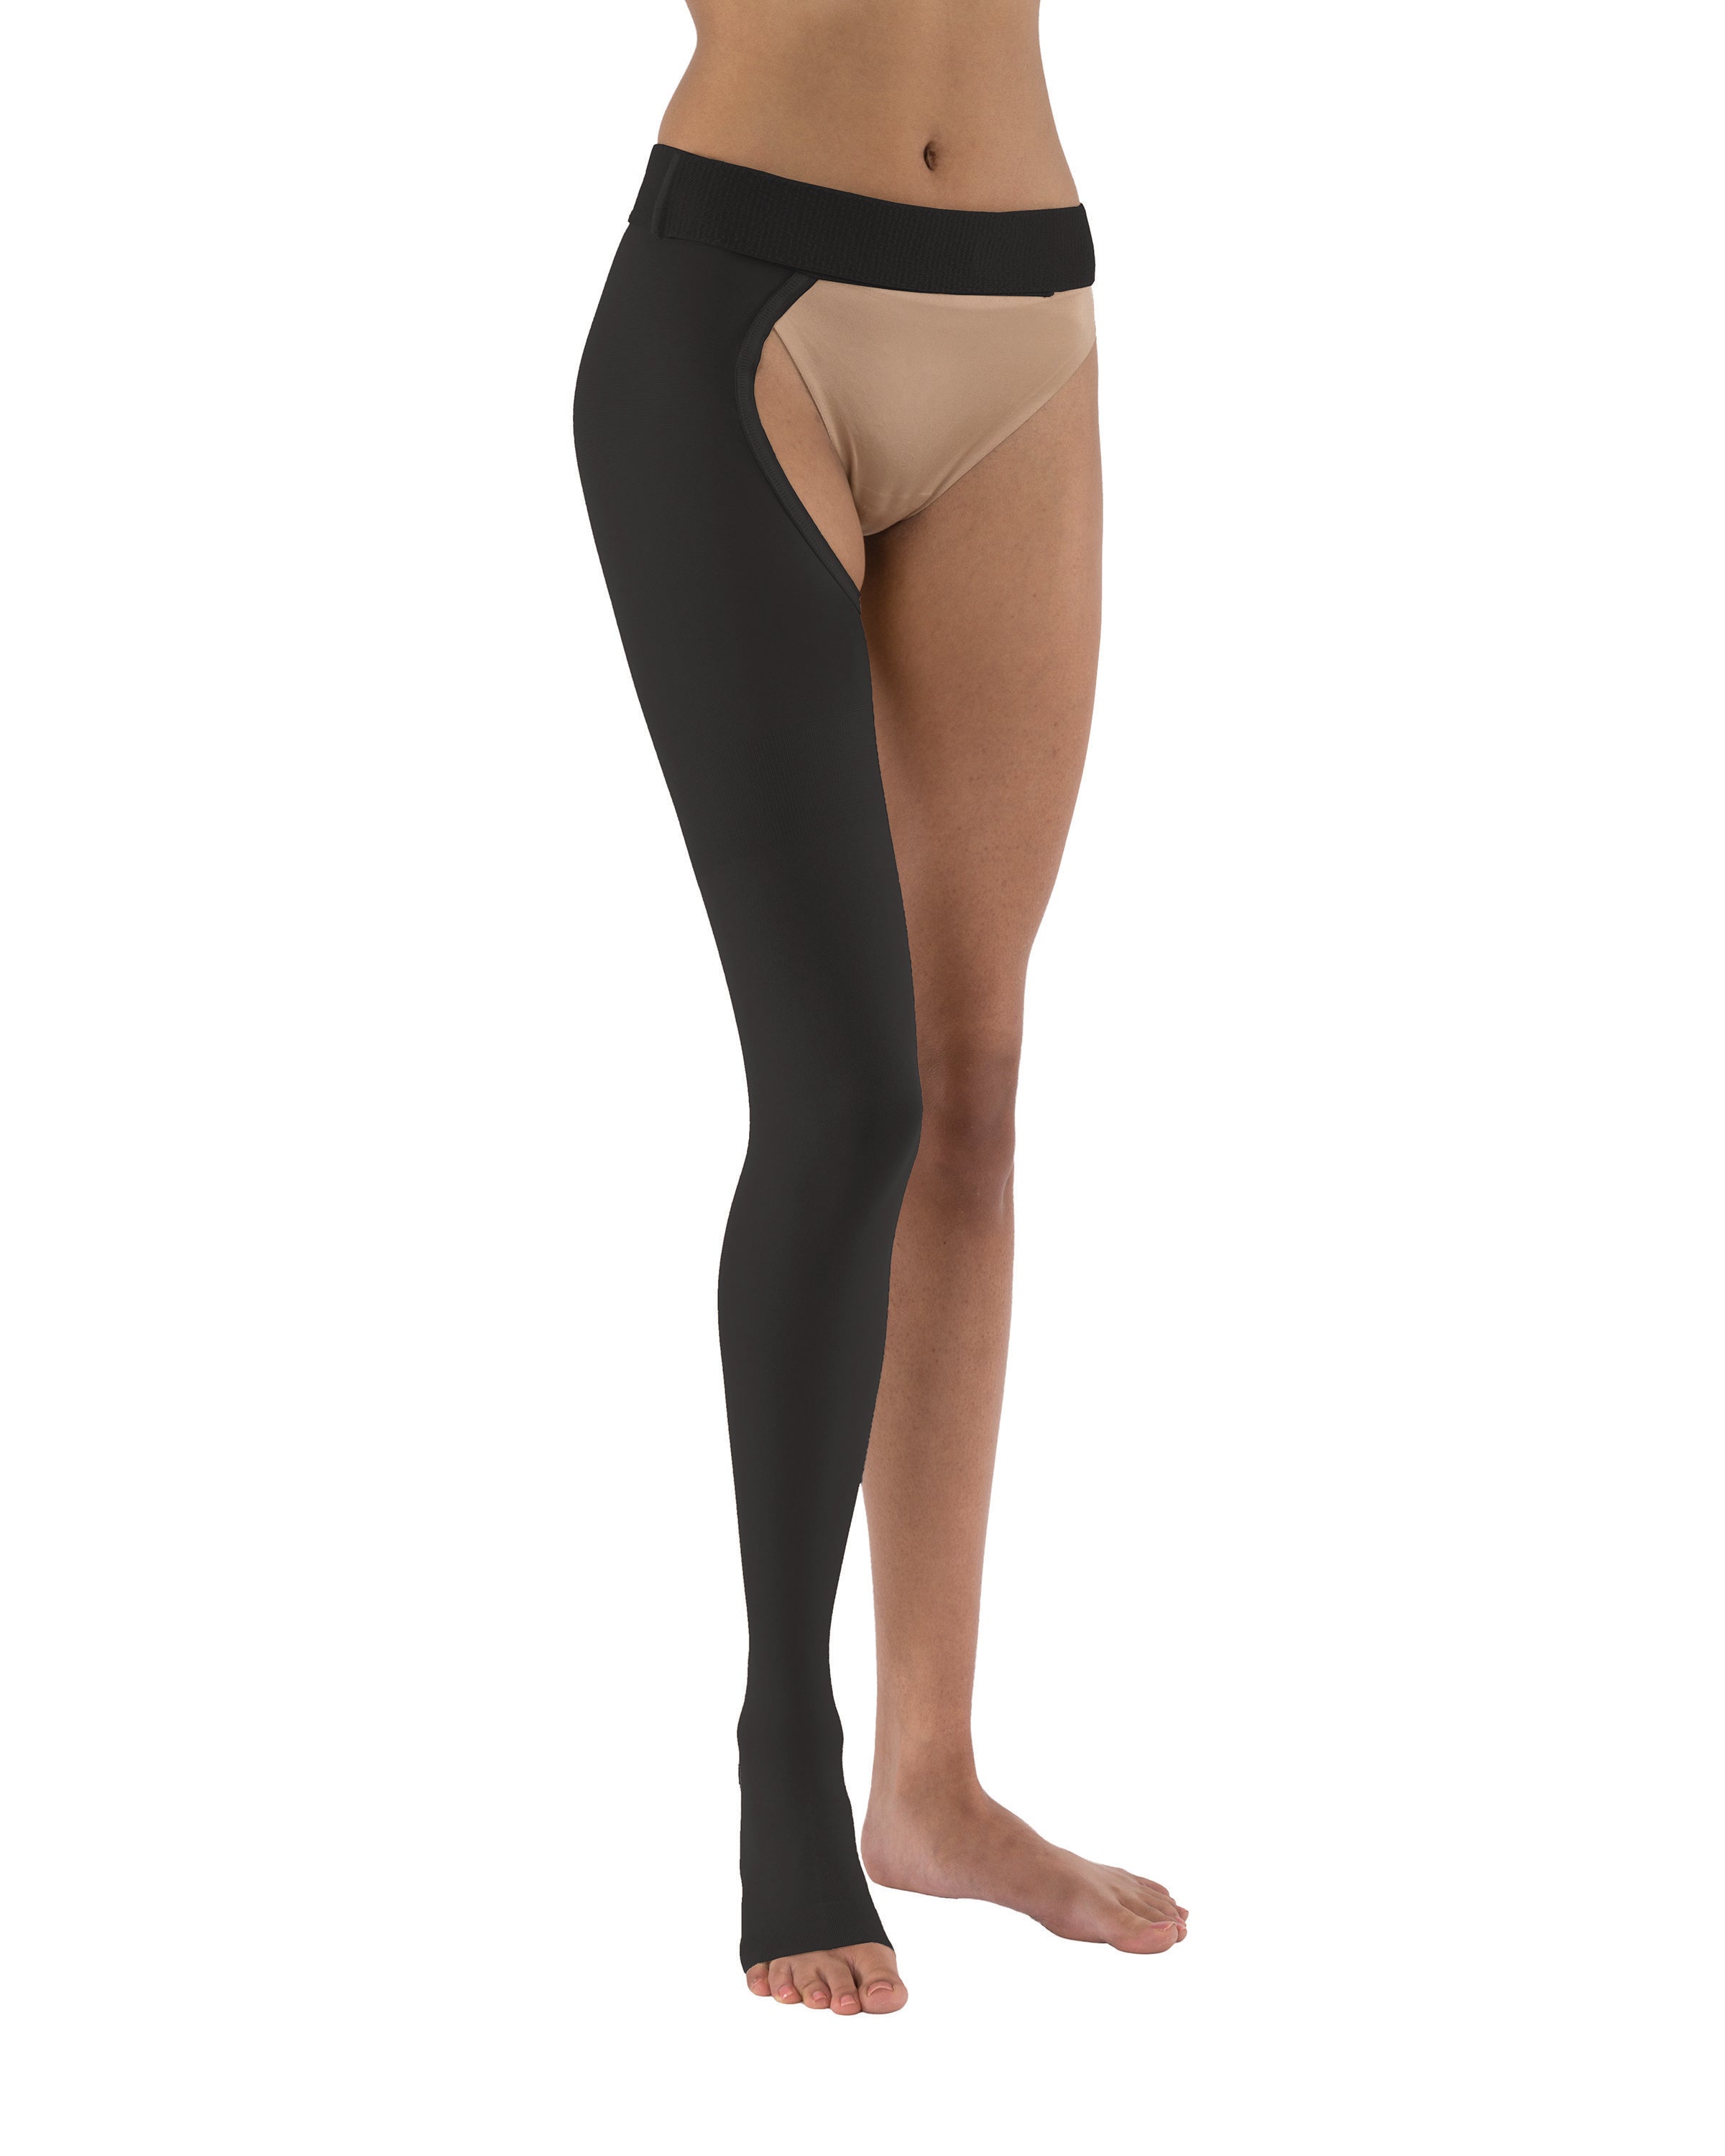 JOBST Relief Compression Stockings Chap